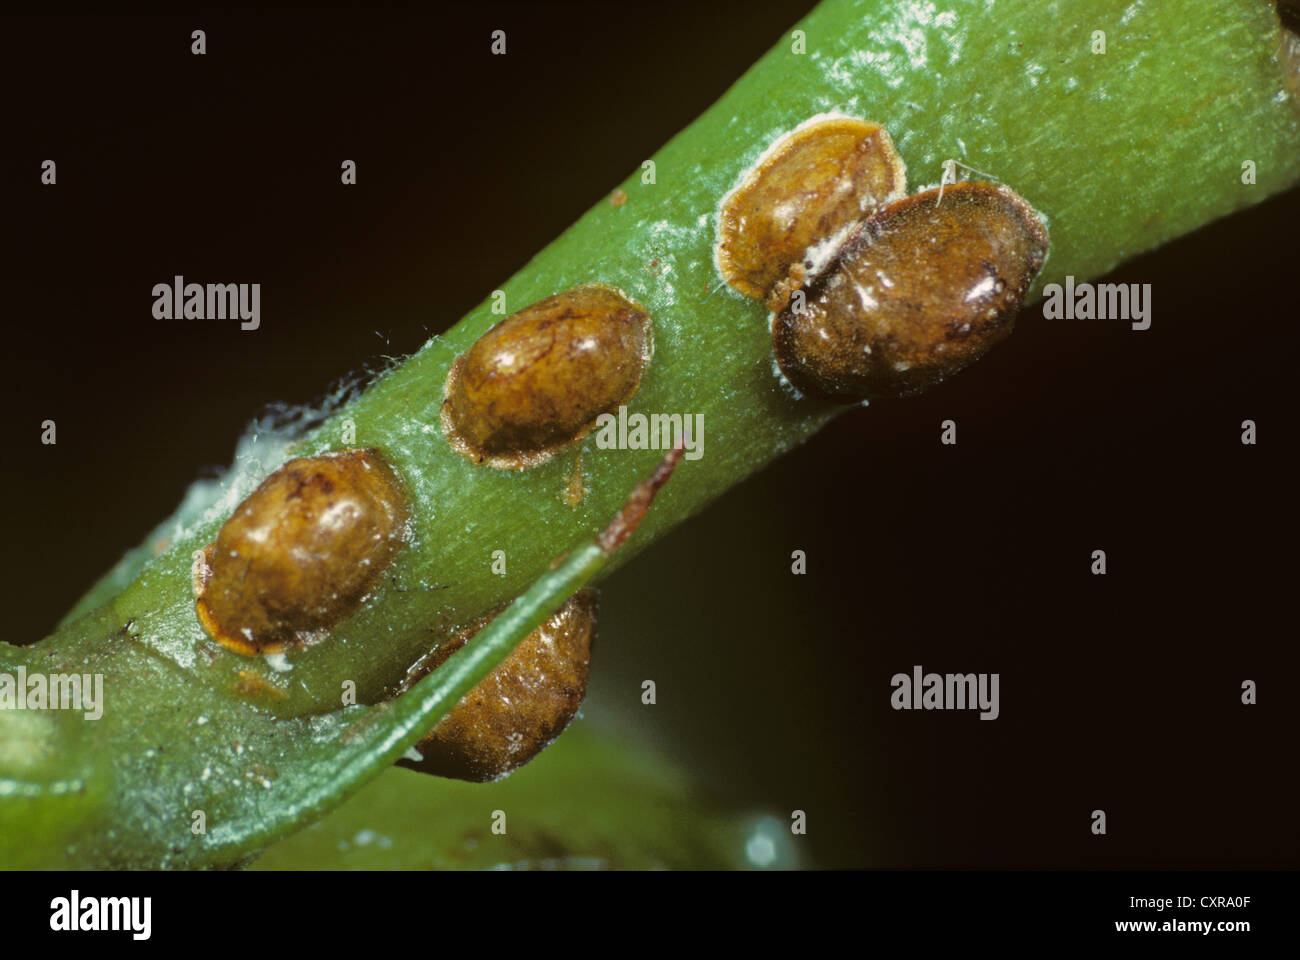 Brown scale insect, Parthenolecanium corni, on the stem of an indoor ornamental plant Stock Photo